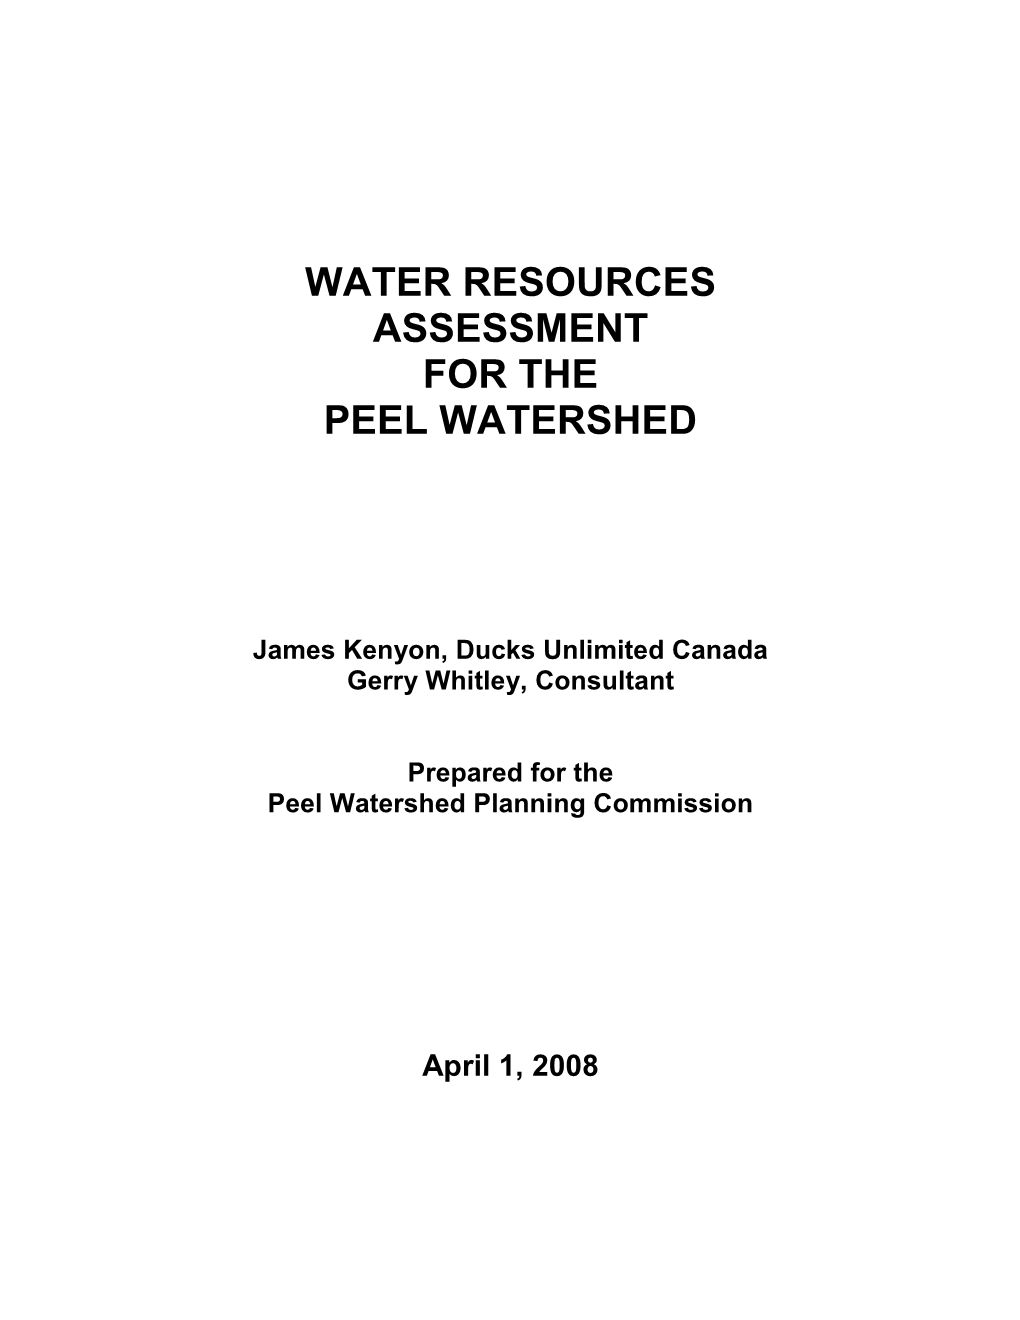 Water Resources Assessment for the Peel Watershed